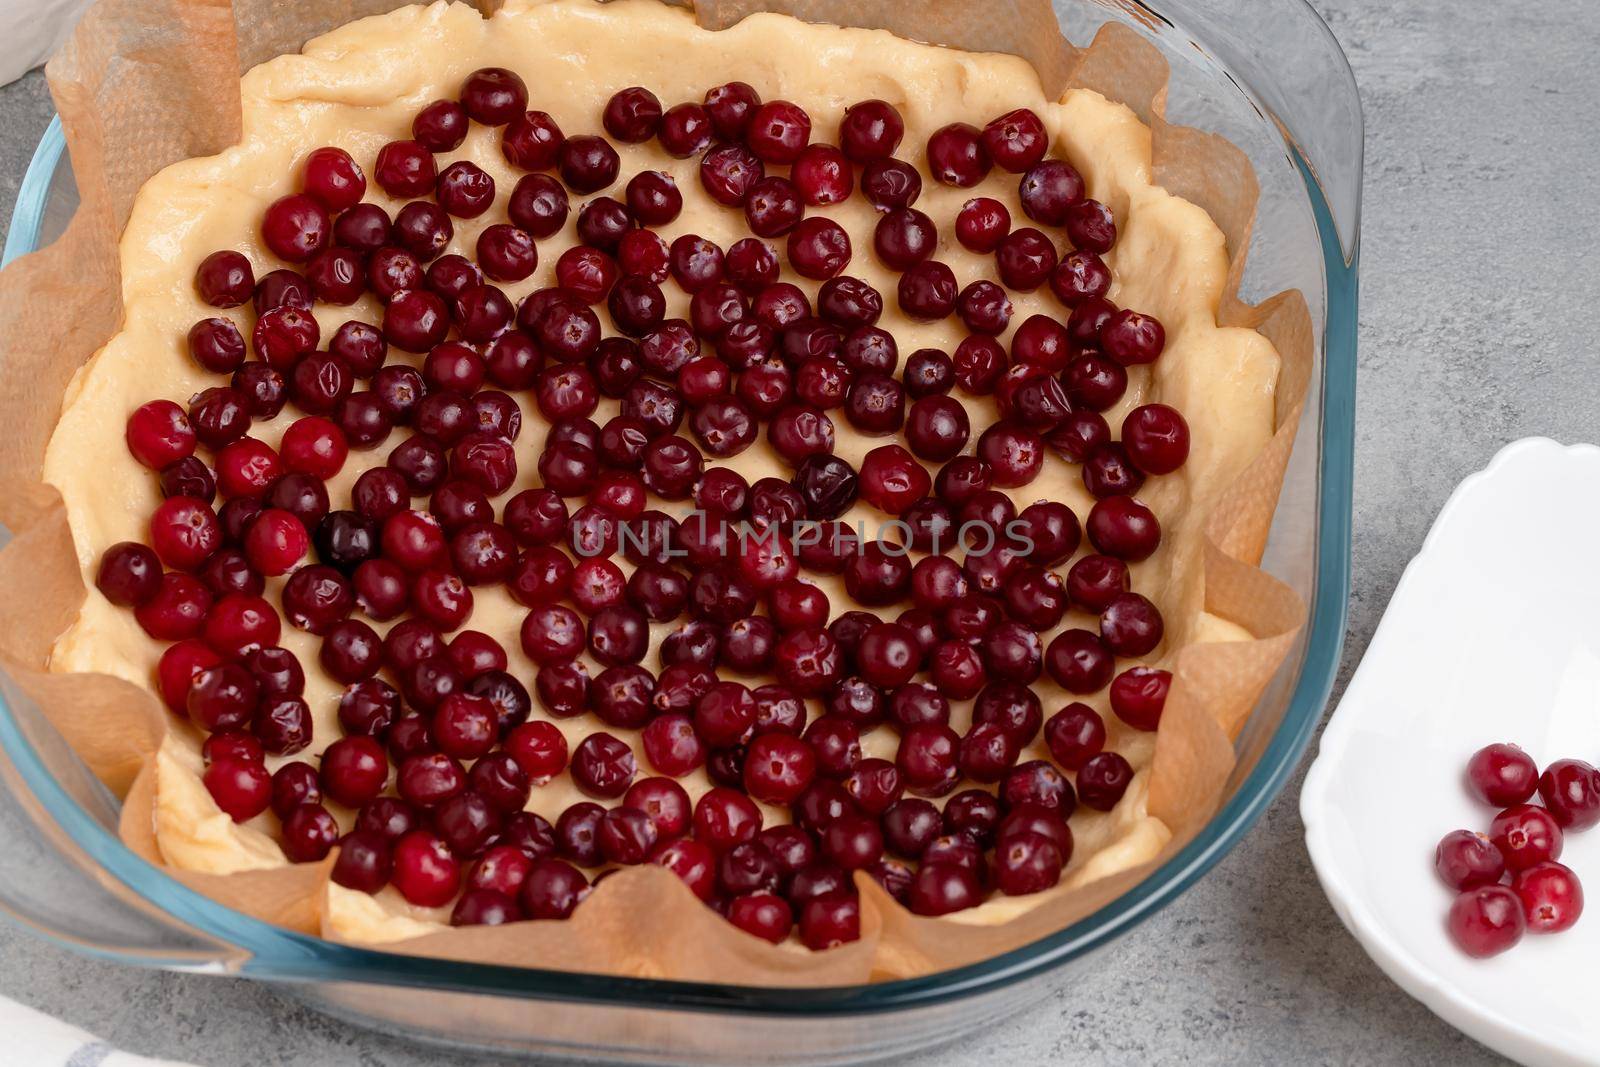 Homemade baking. Making a sweet cranberry pie in a glass baking dish.